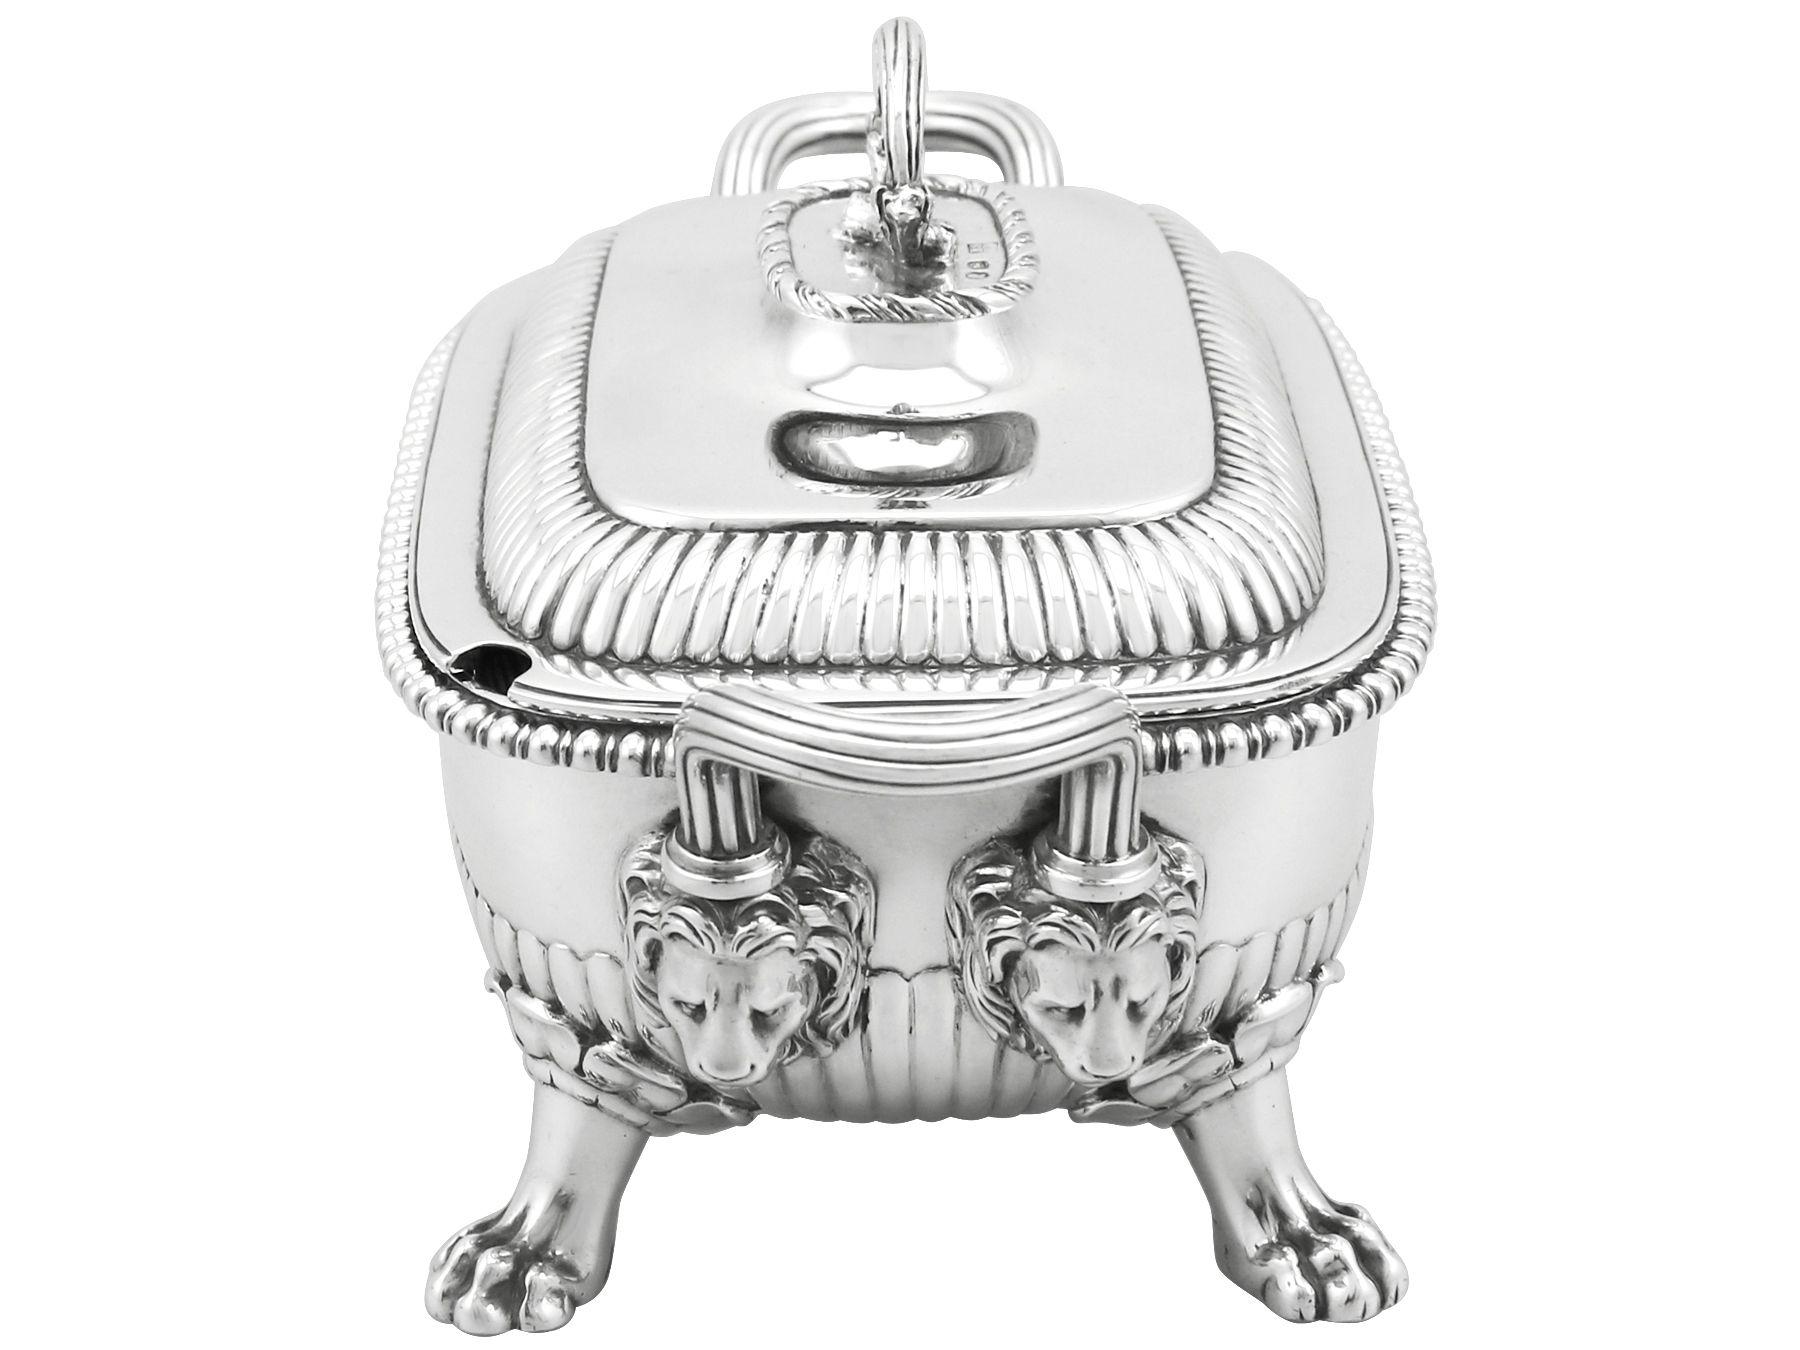 Antique George III Sterling Silver Tureens 1810 For Sale 3